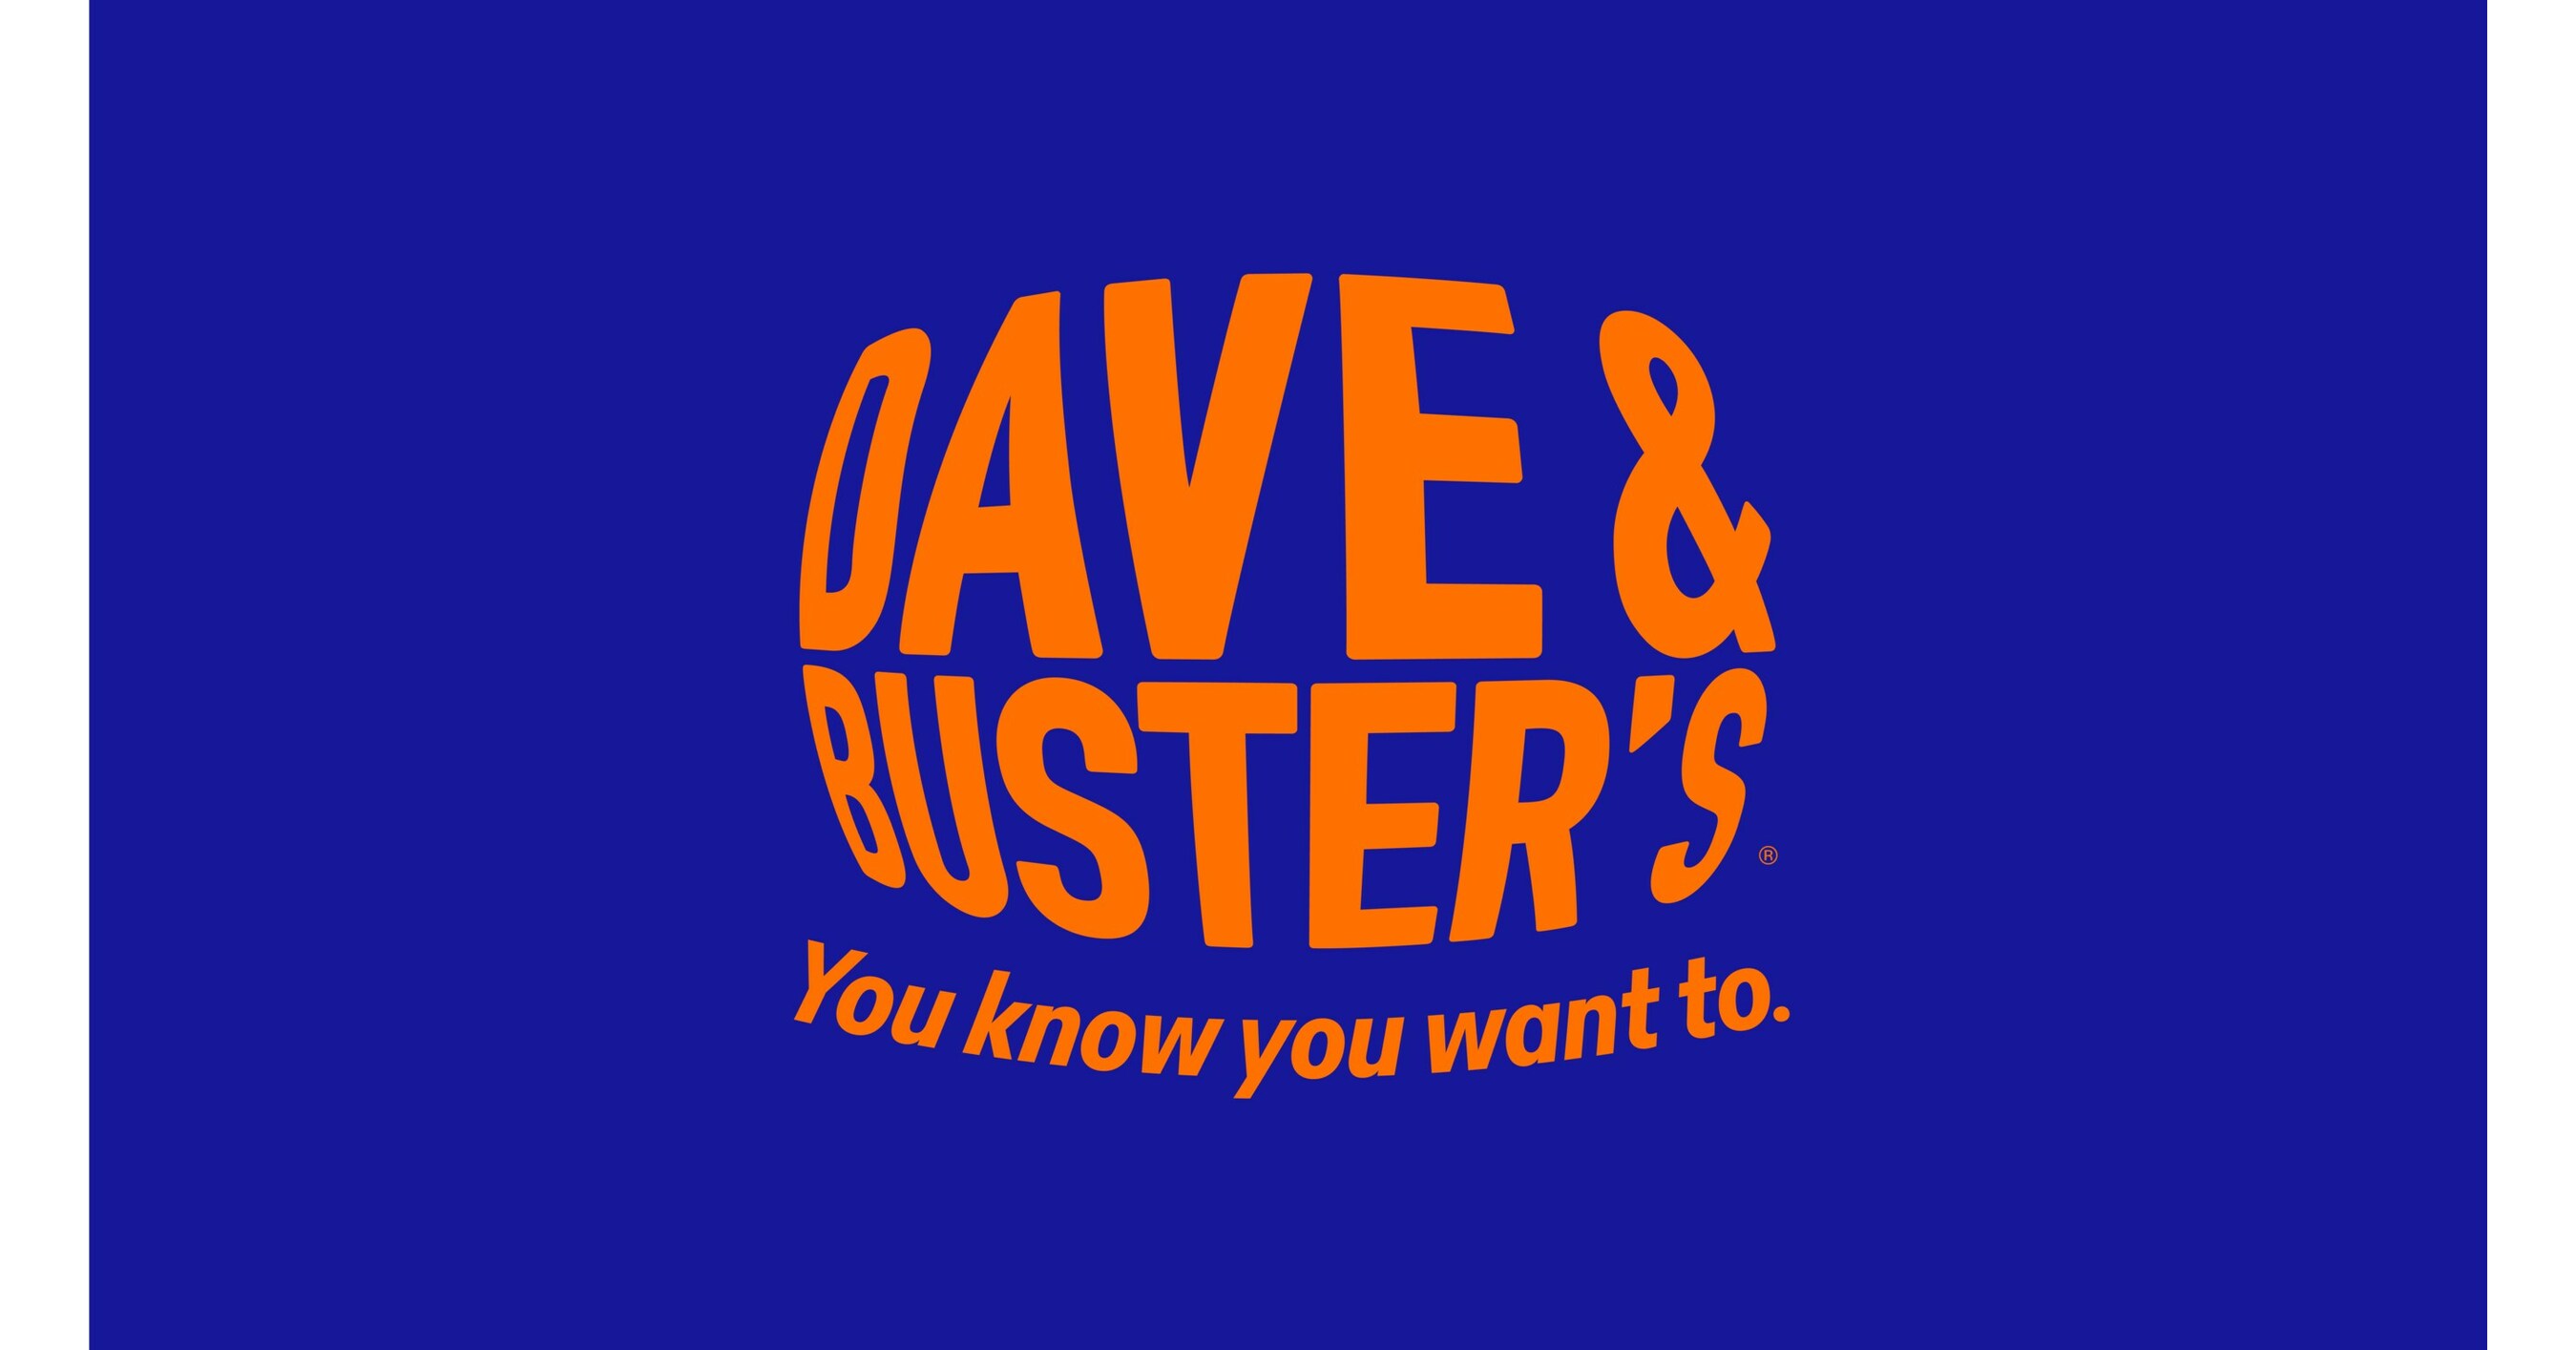 Dave & Buster's :  Official Travel Source